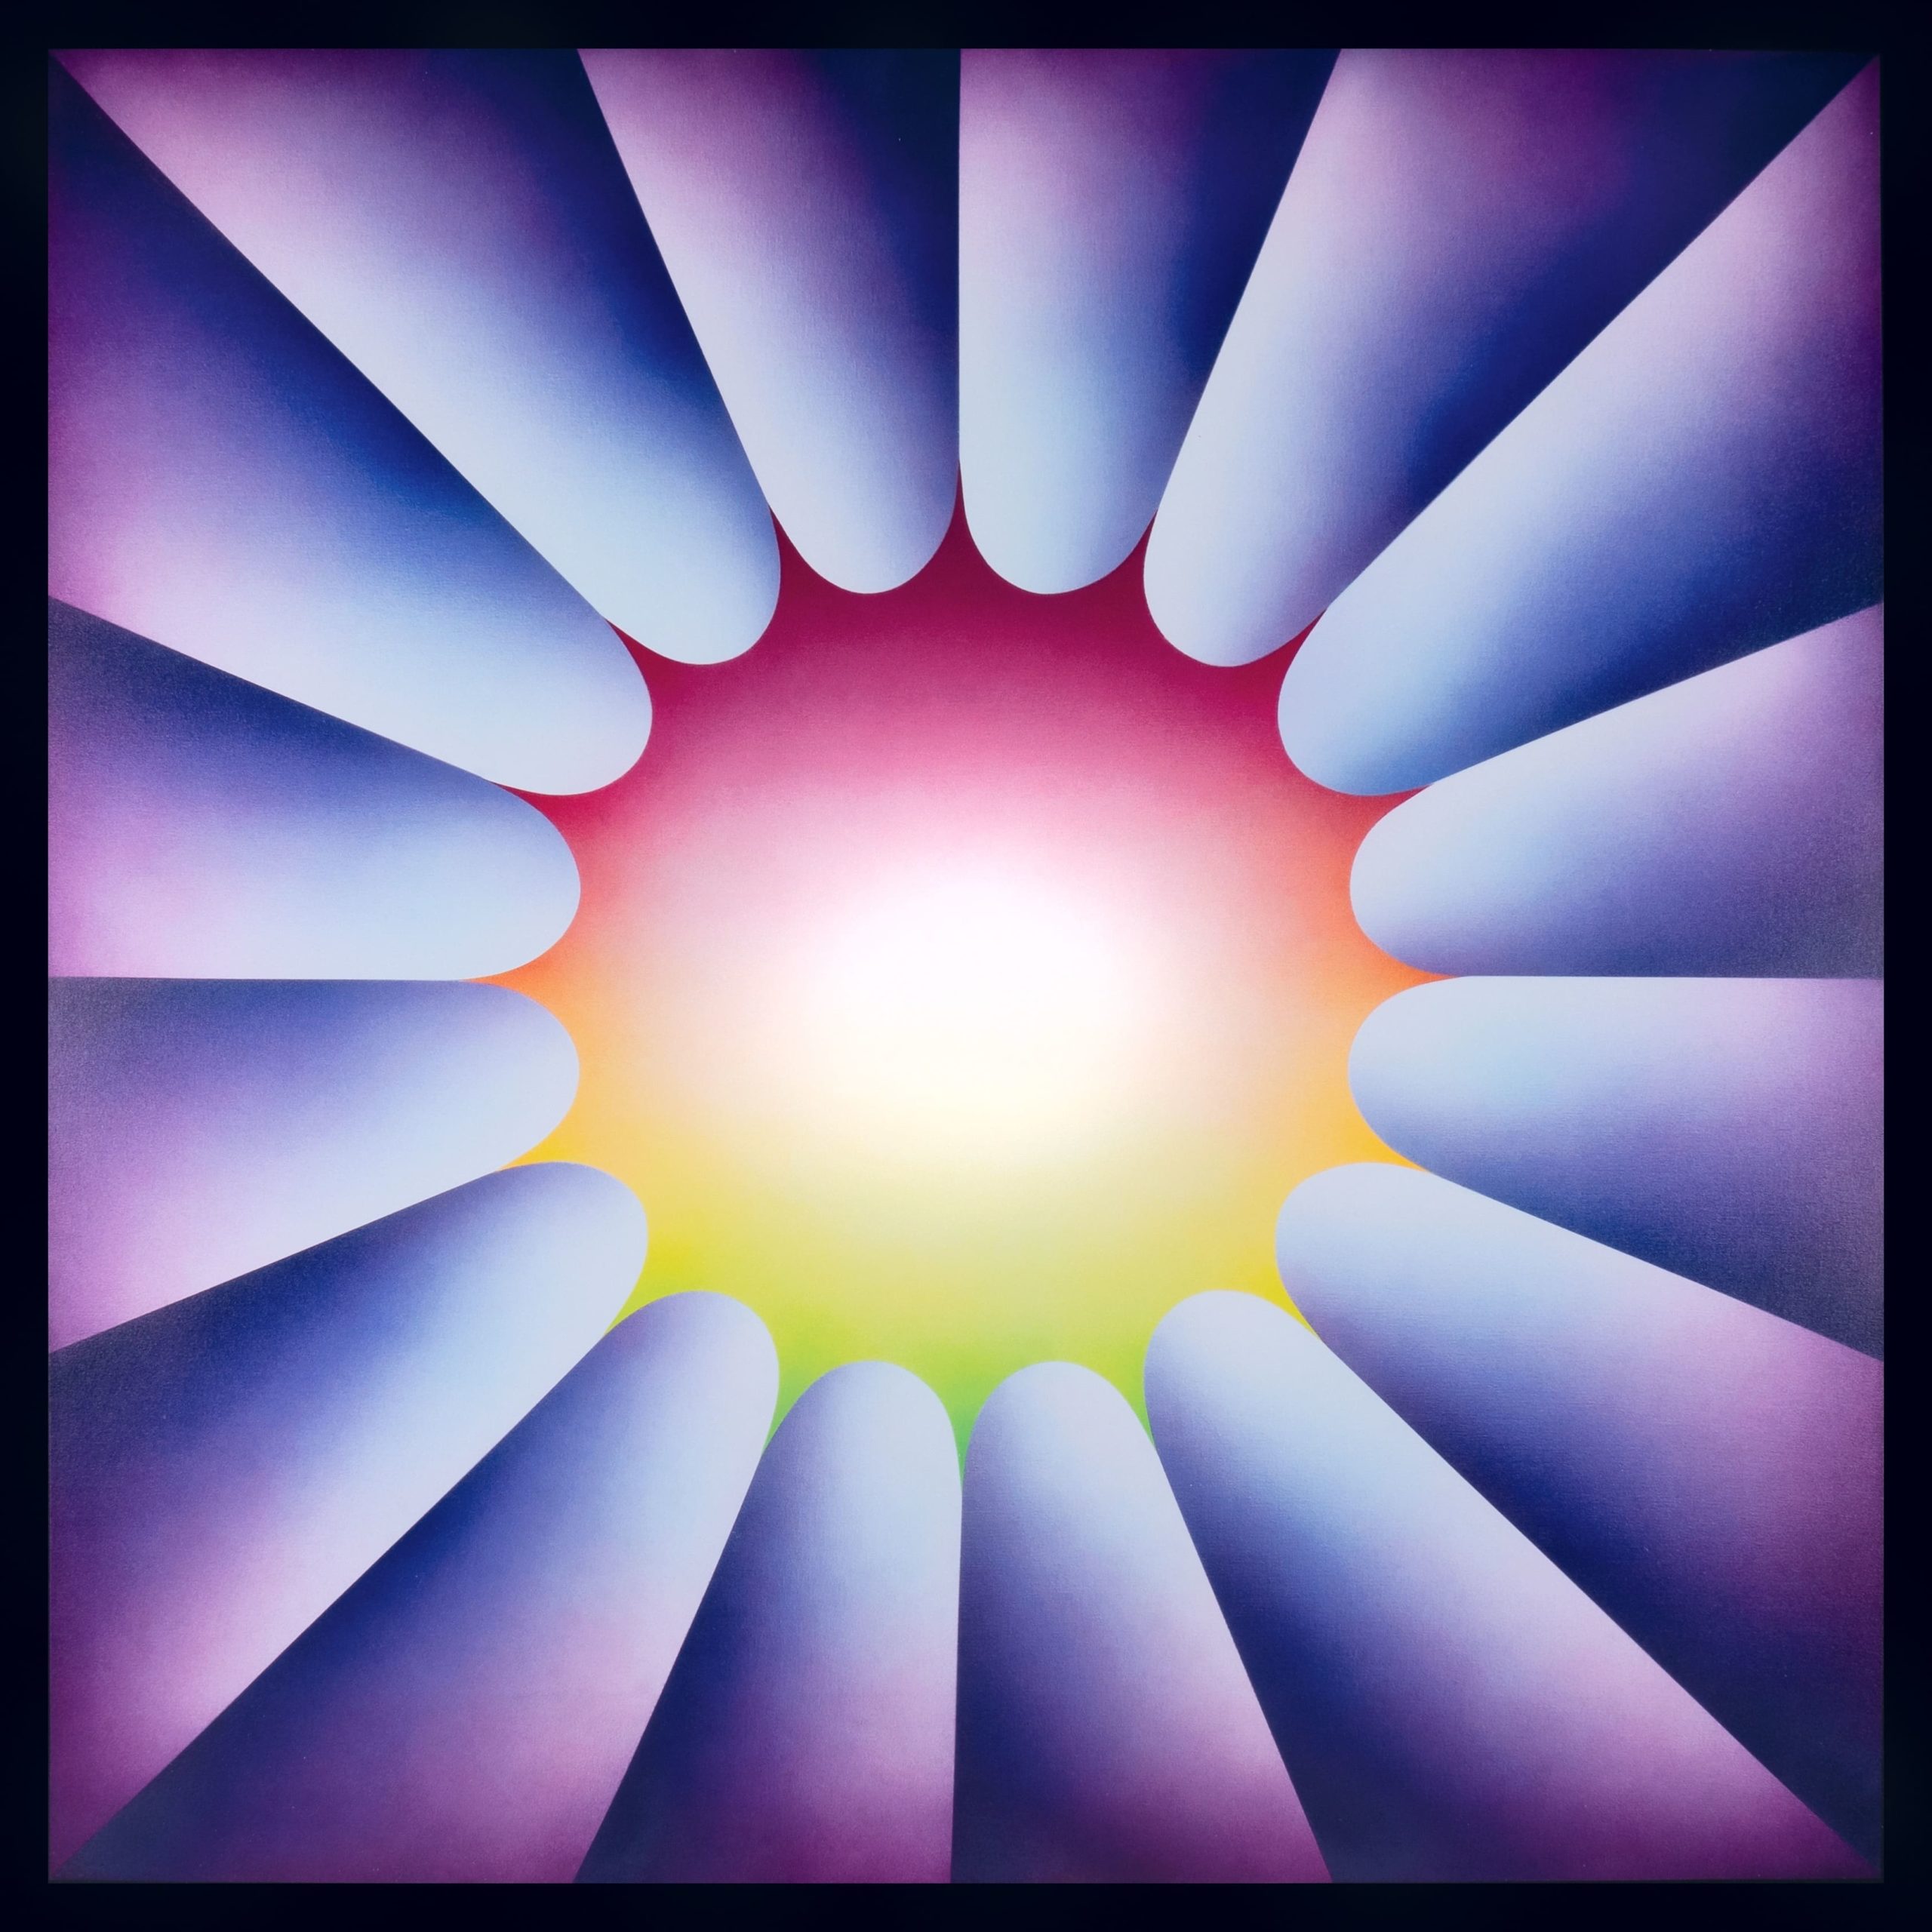 Judy Chicago with Turner Carroll Gallery for Dallas Art Fair